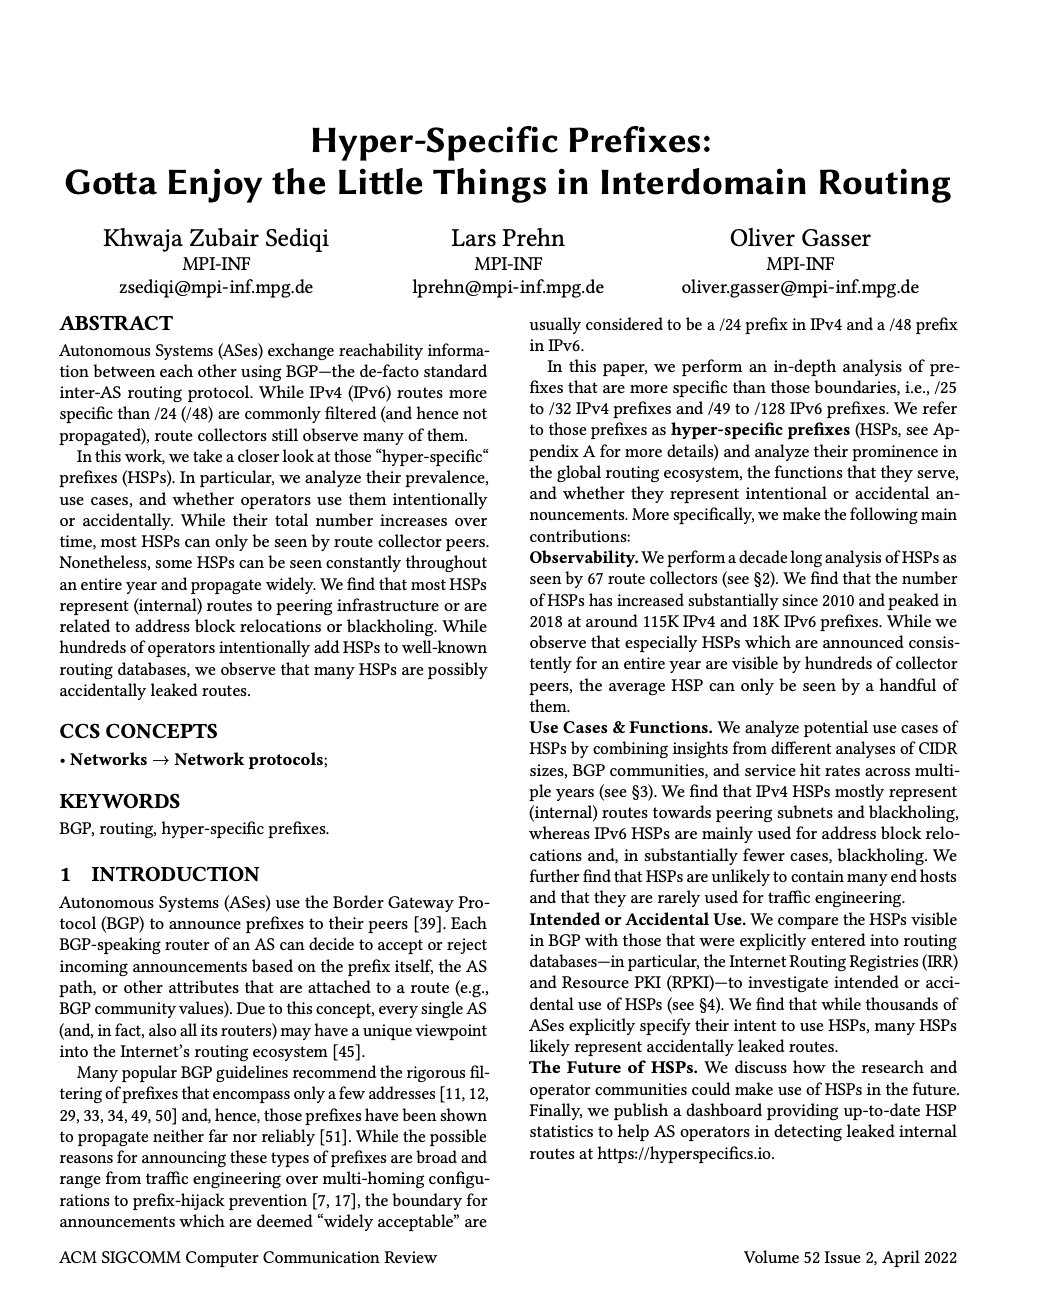 Download paper: Hyper-Specific Prefixes: Gotta Enjoy the Little Things in Interdomain Routing